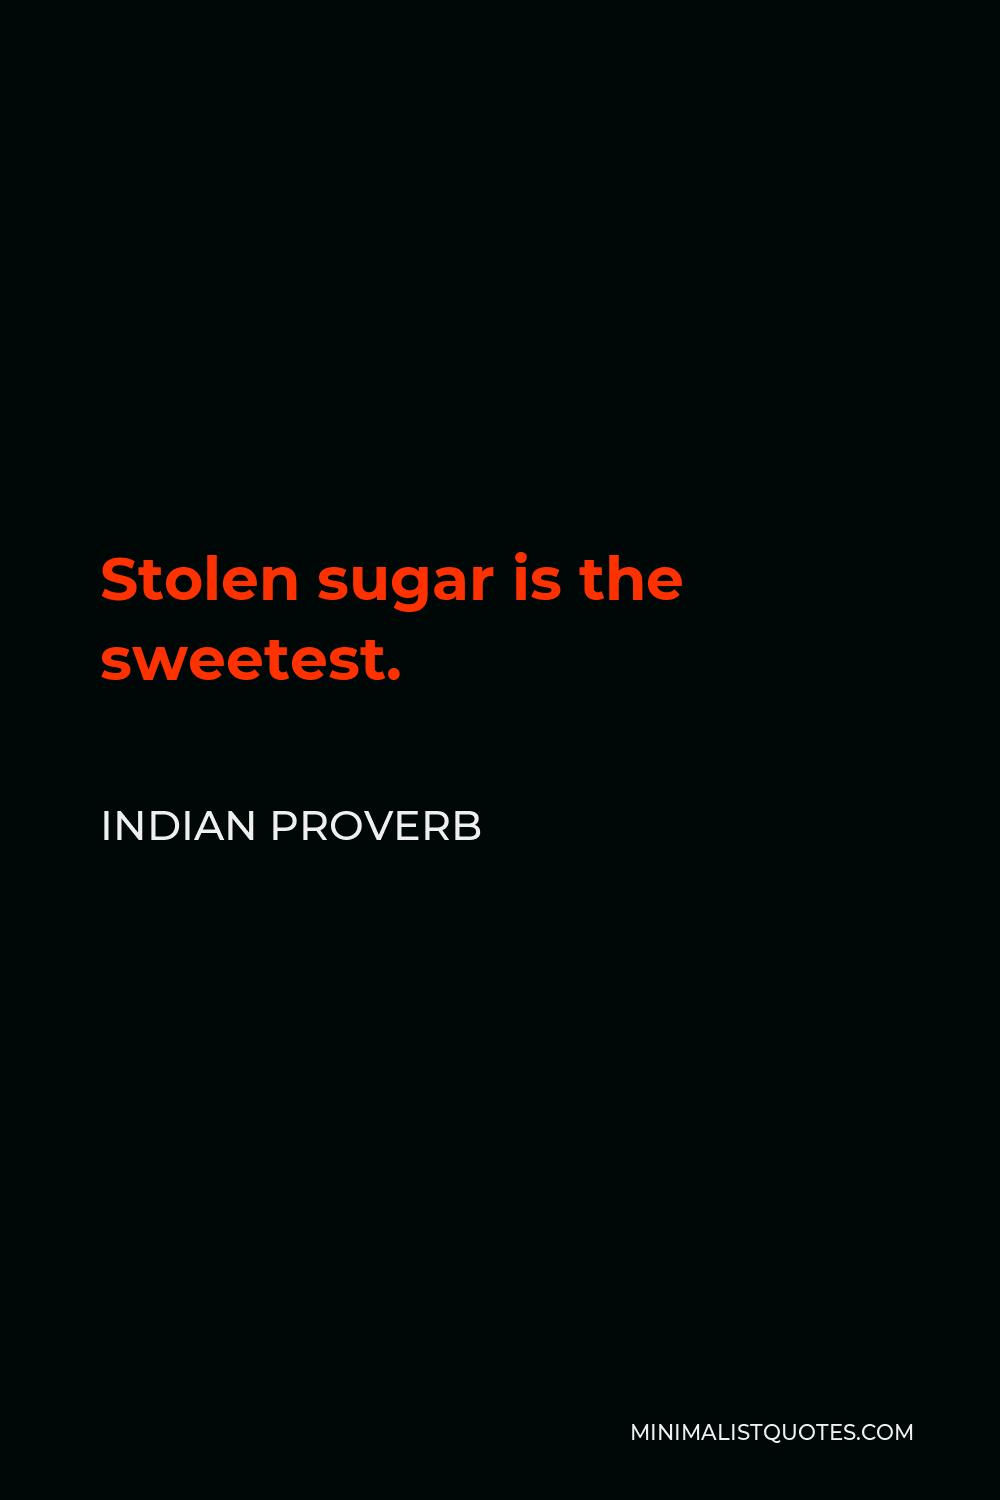 Indian Proverb Quote - Stolen sugar is the sweetest.